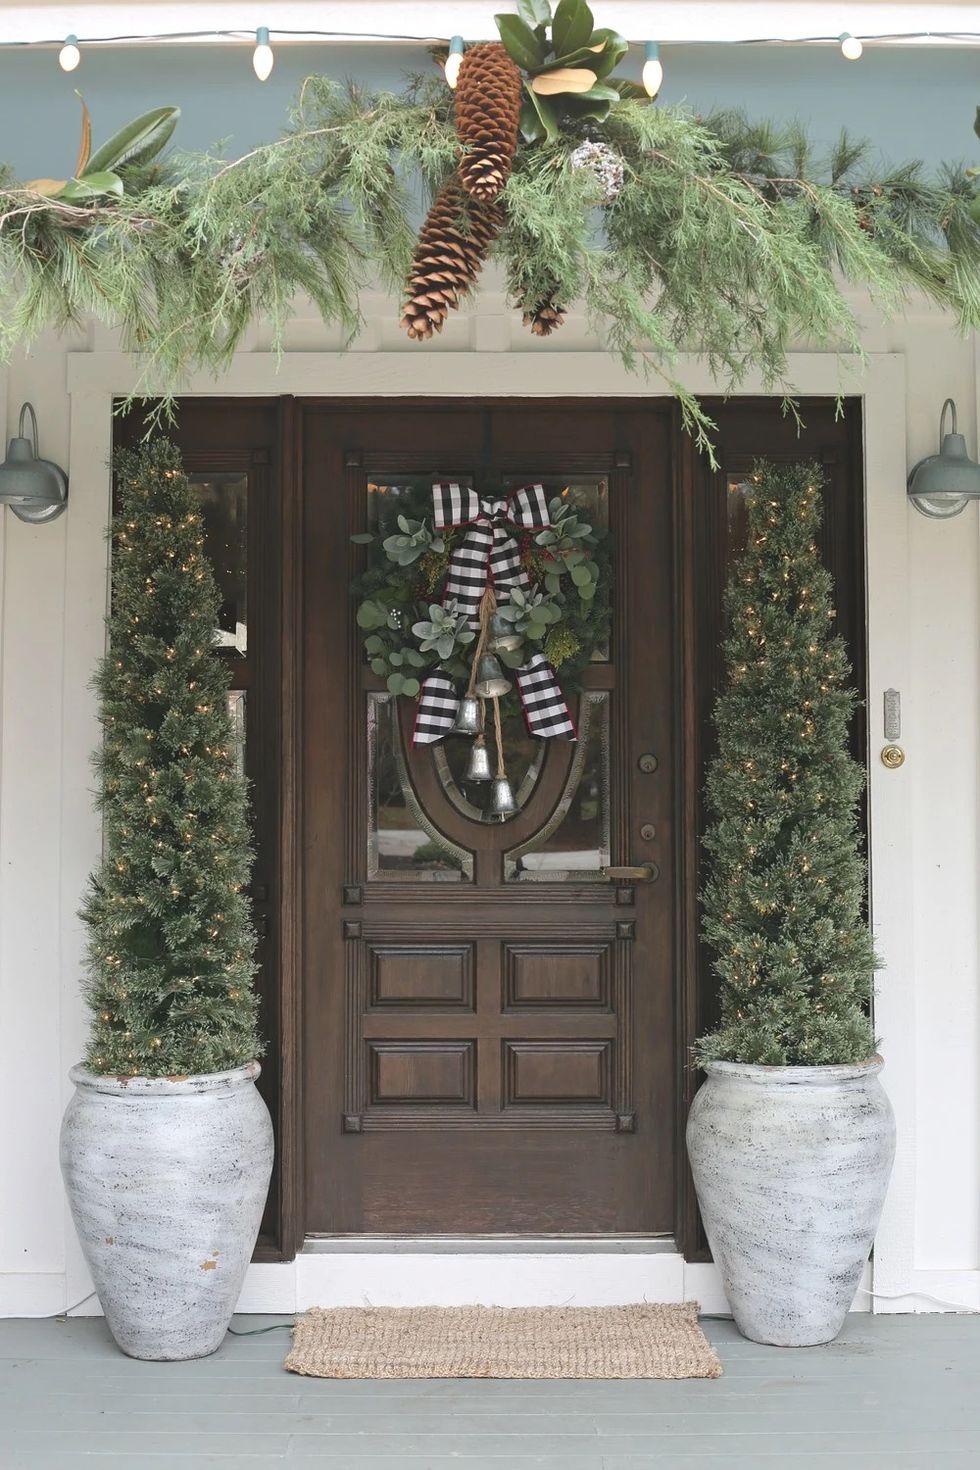 https://hips.hearstapps.com/hmg-prod/images/creativity-exchange-modern-farmhouse-christmas-front-entry-with-wreath-6526a56bed5ce.jpeg?crop=1xw:1xh;center,top&resize=980:*